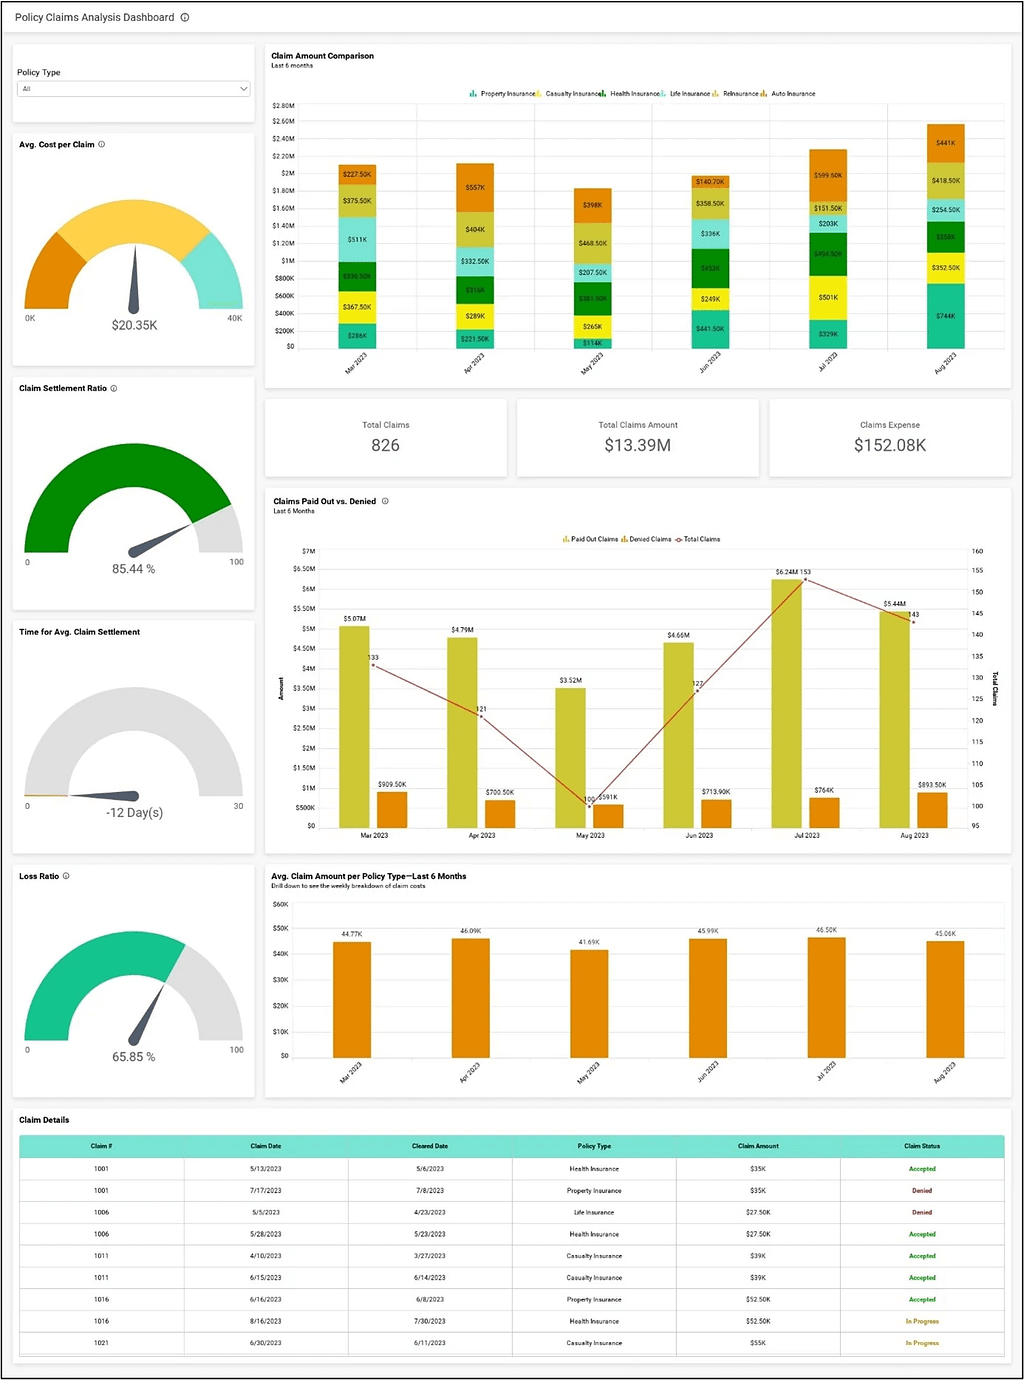 Policy Claims Analysis Dashboard